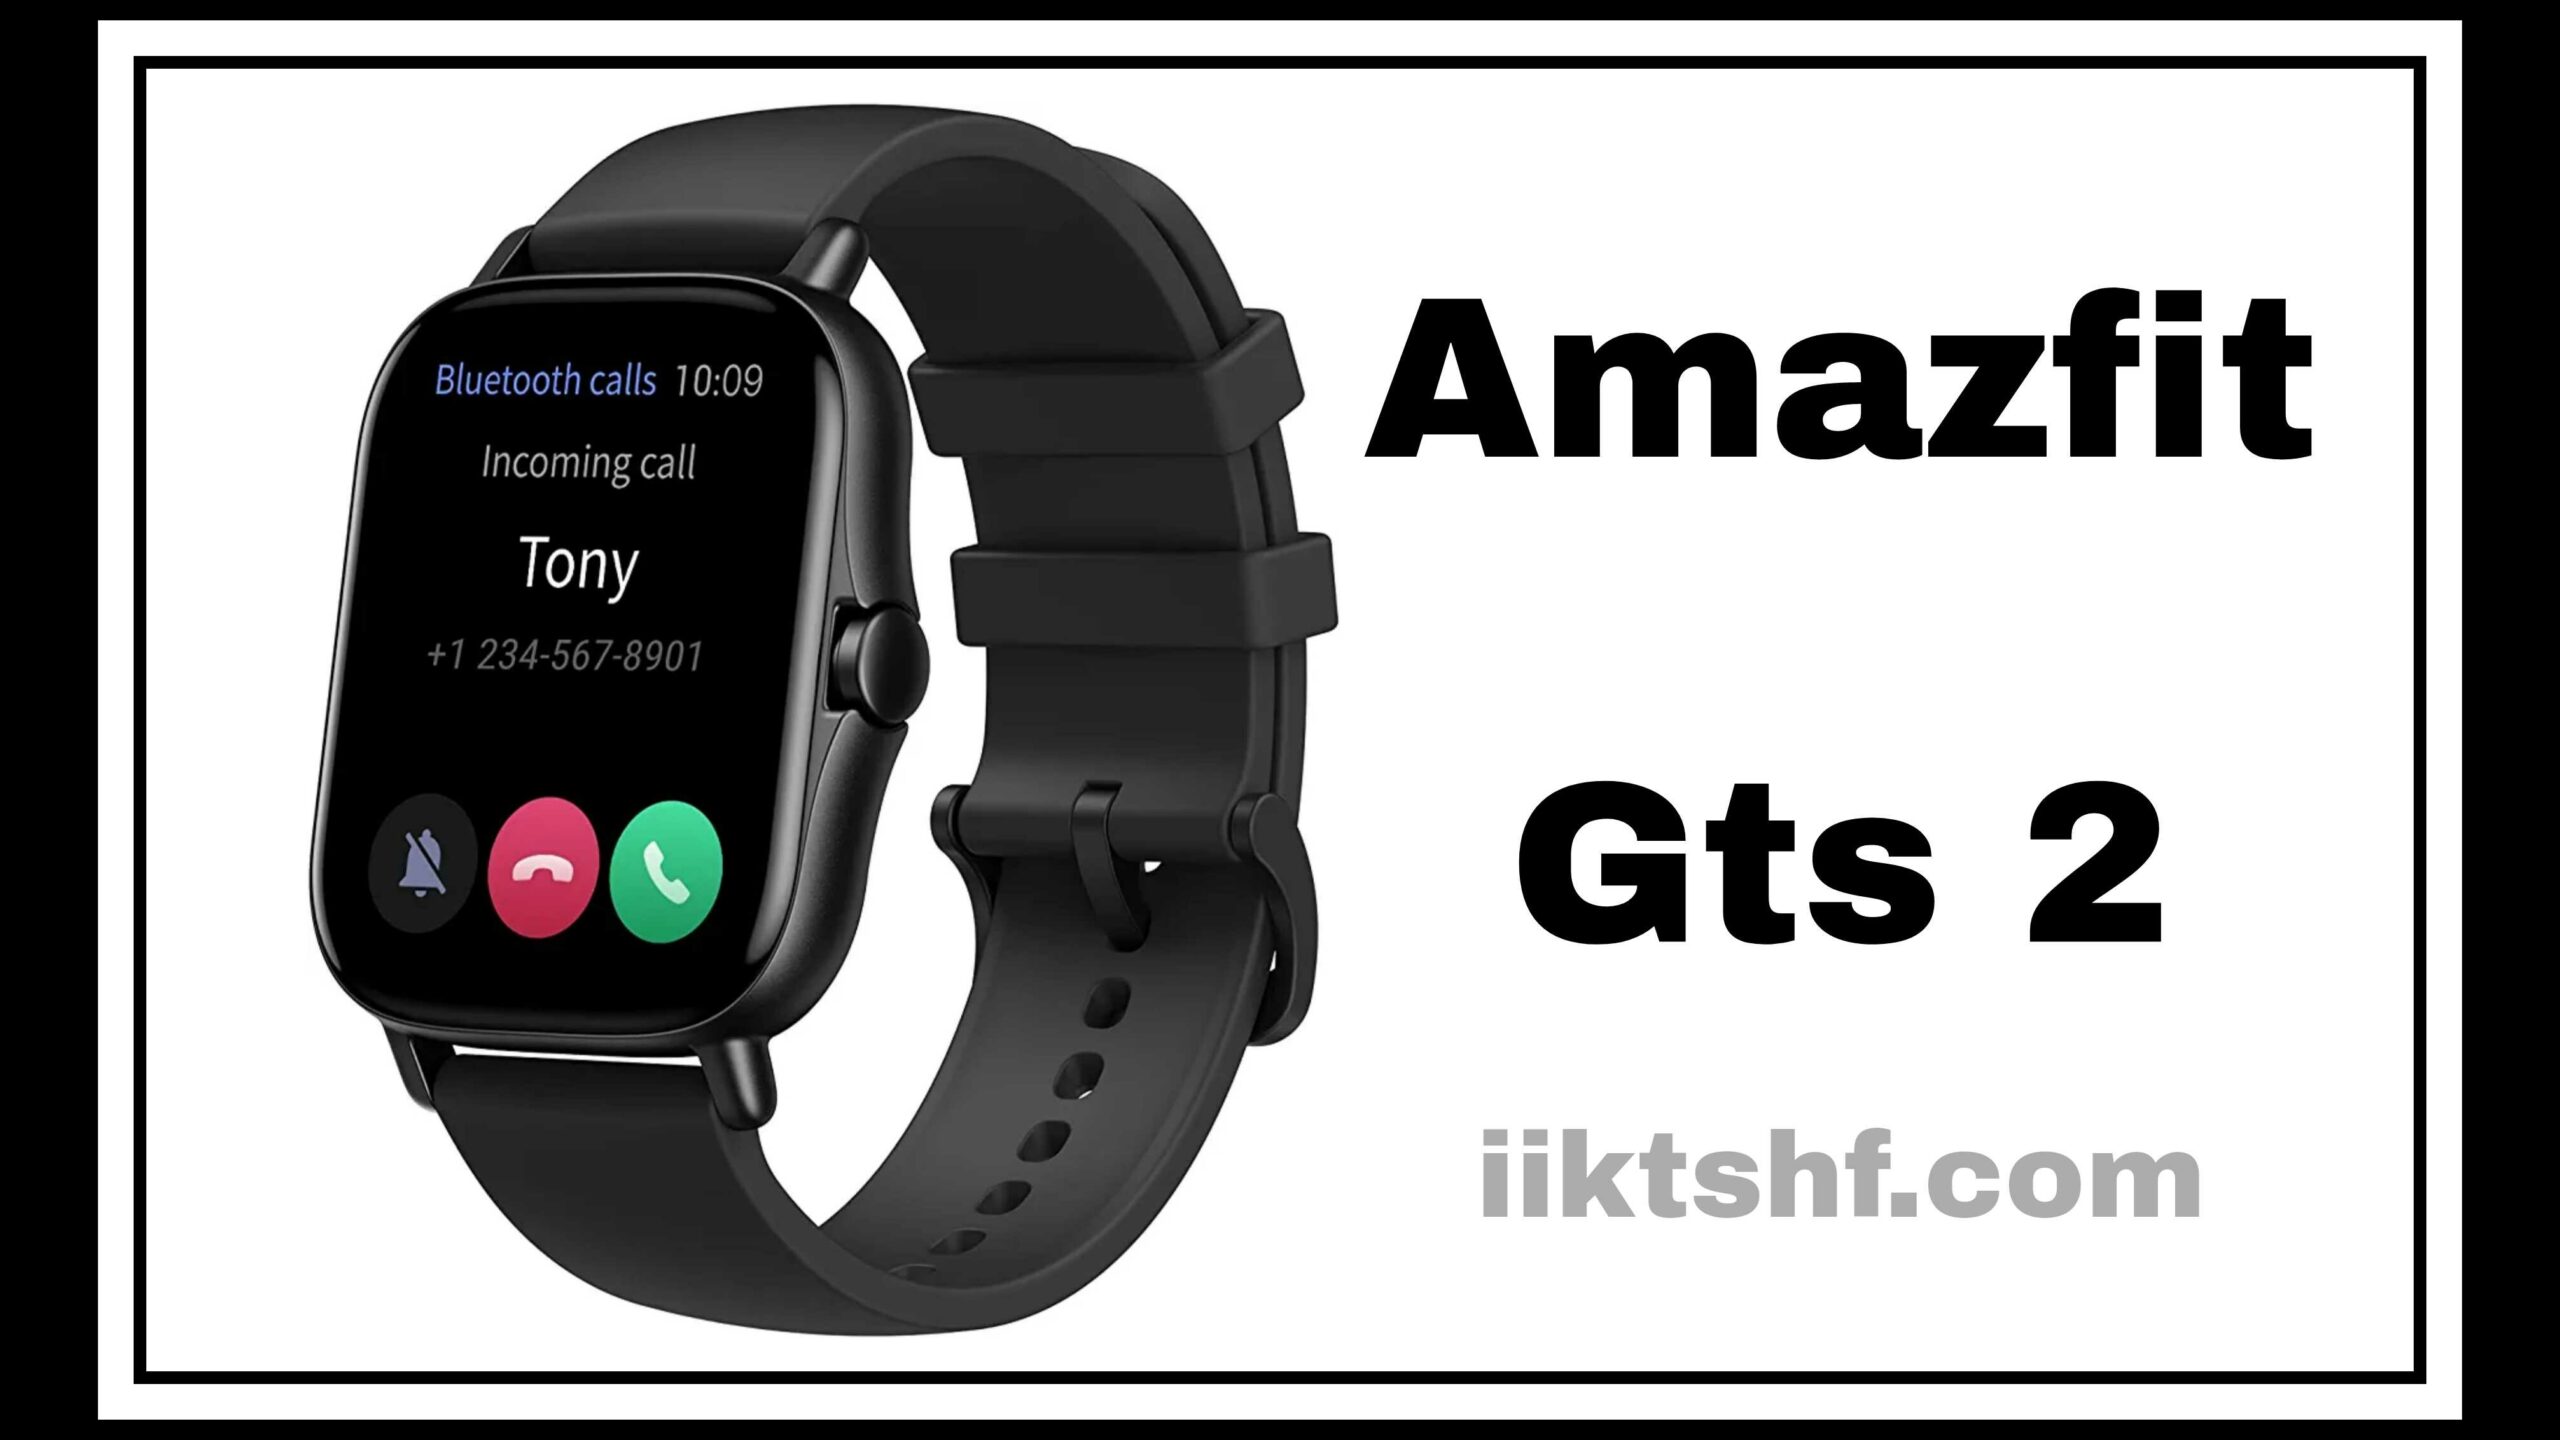 Price and specifications of the wonderful Amazfit Gts 2 watch from Xiaomi